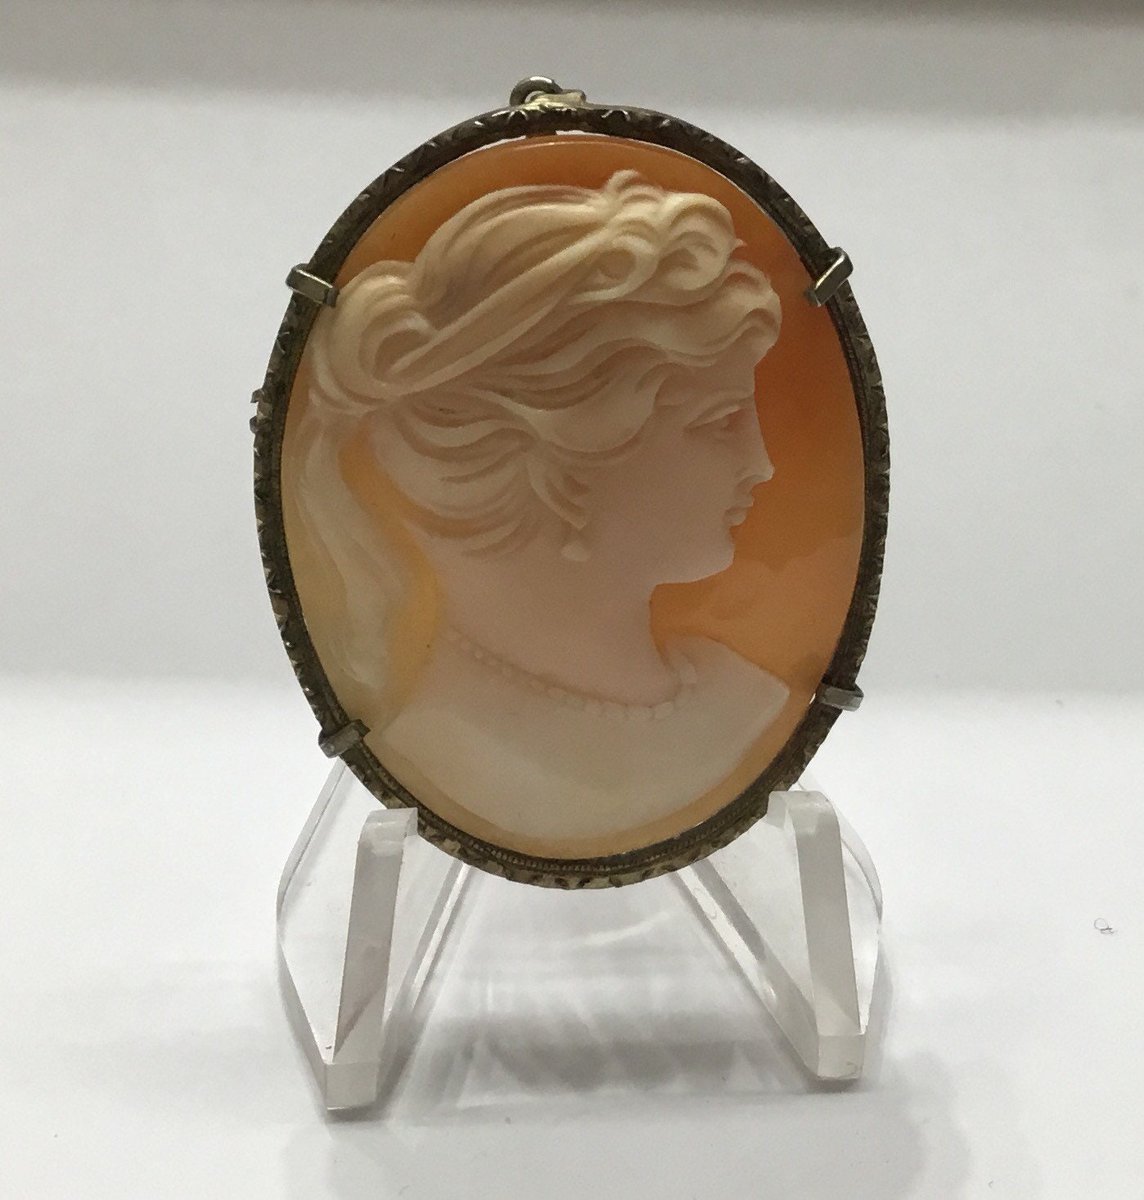 Excited to share the latest addition to my #BagsofFunCyprus: Large natural shell carved vintage cameo brooch and pendant in 800 silver gilt. etsy.me/3OiLuzD #pendant #800silver #shell #cameo #brooch #vintage #retro #elegant #silver